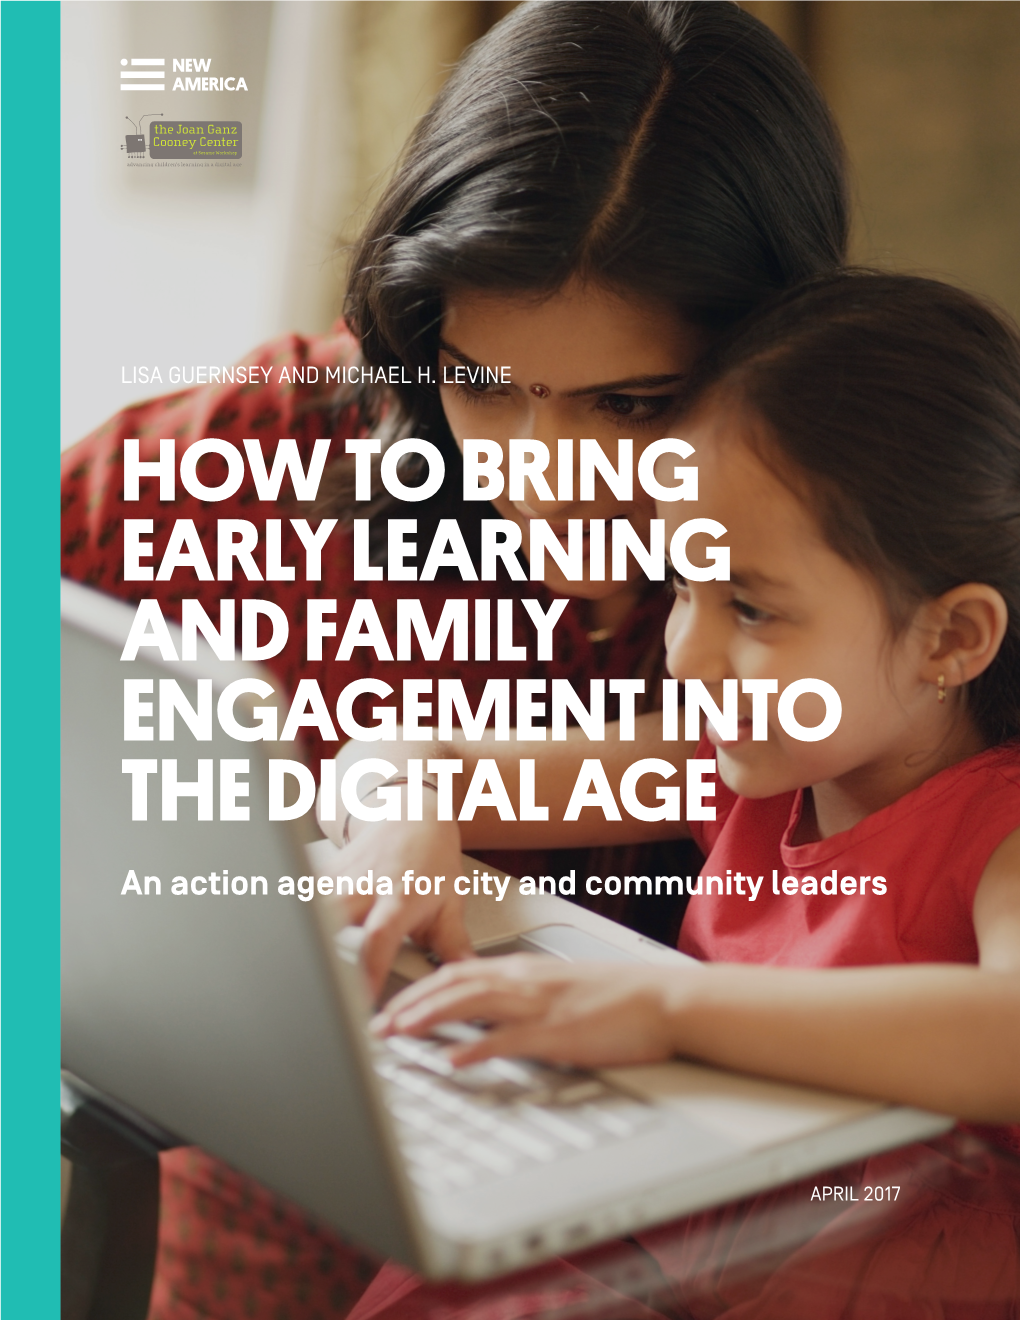 HOW to BRING EARLY LEARNING and FAMILY ENGAGEMENT INTO the DIGITAL AGE an Action Agenda for City and Community Leaders